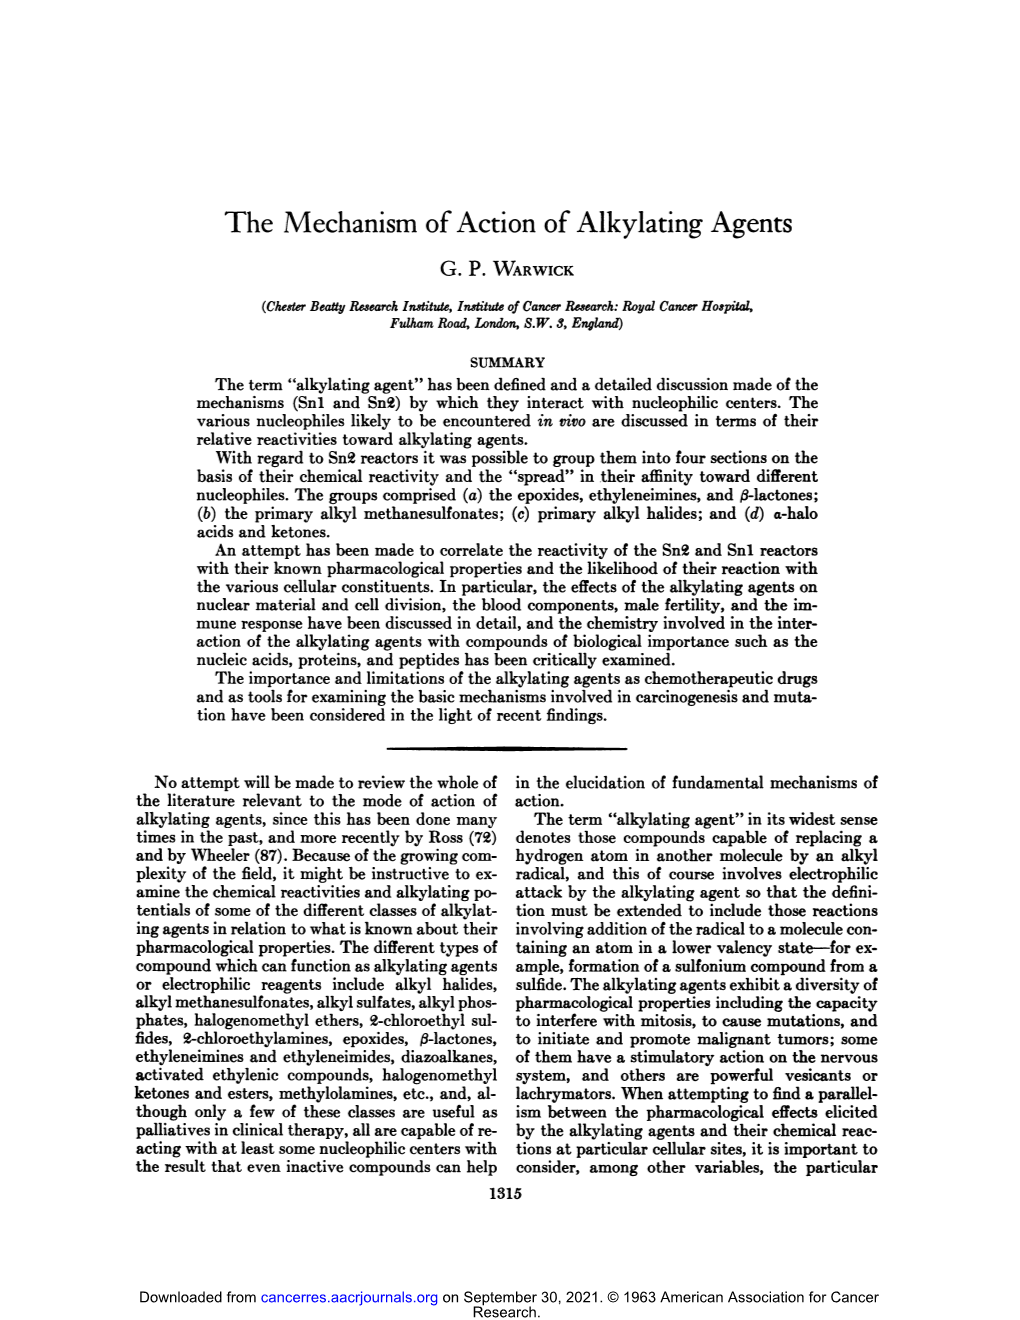 The Mechanism of Action of Alkylating Agents G